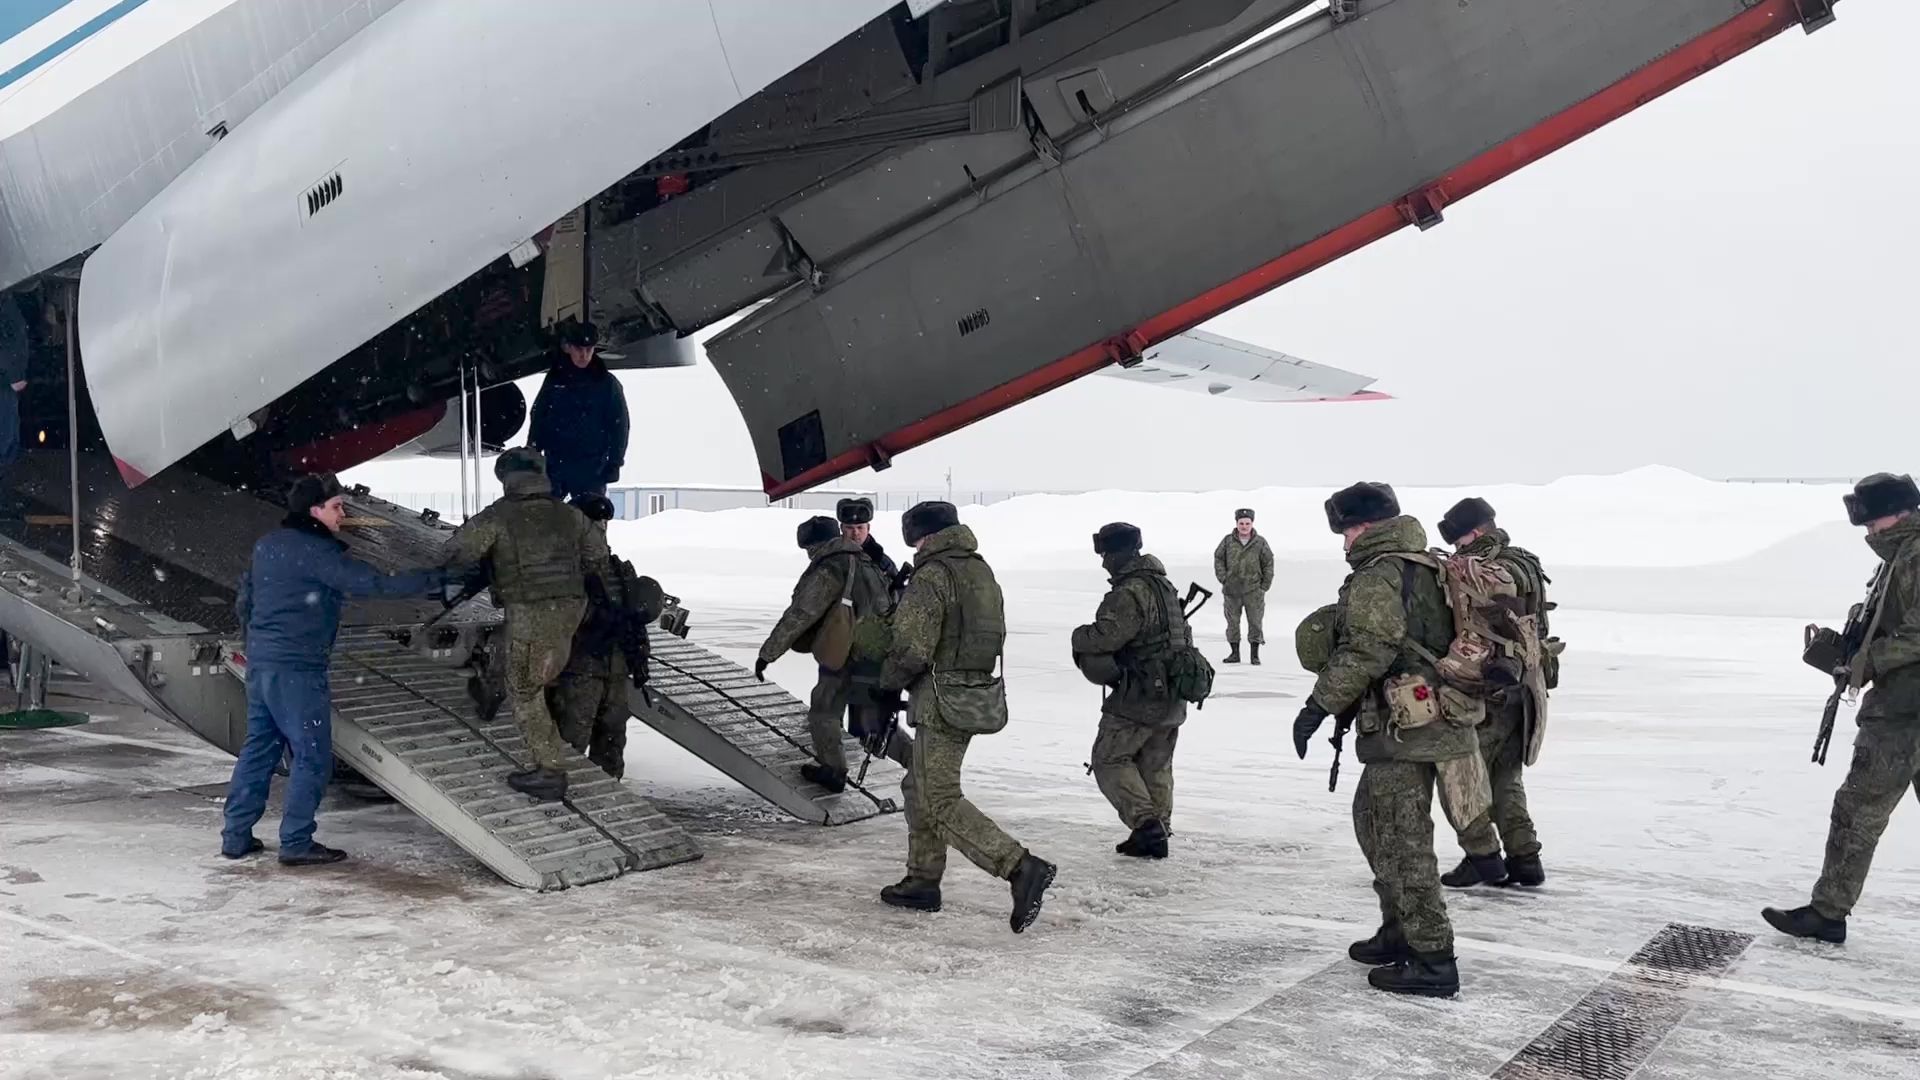 Russian troops boarding a military aircraft in Moscow on their way to Kazakhstan